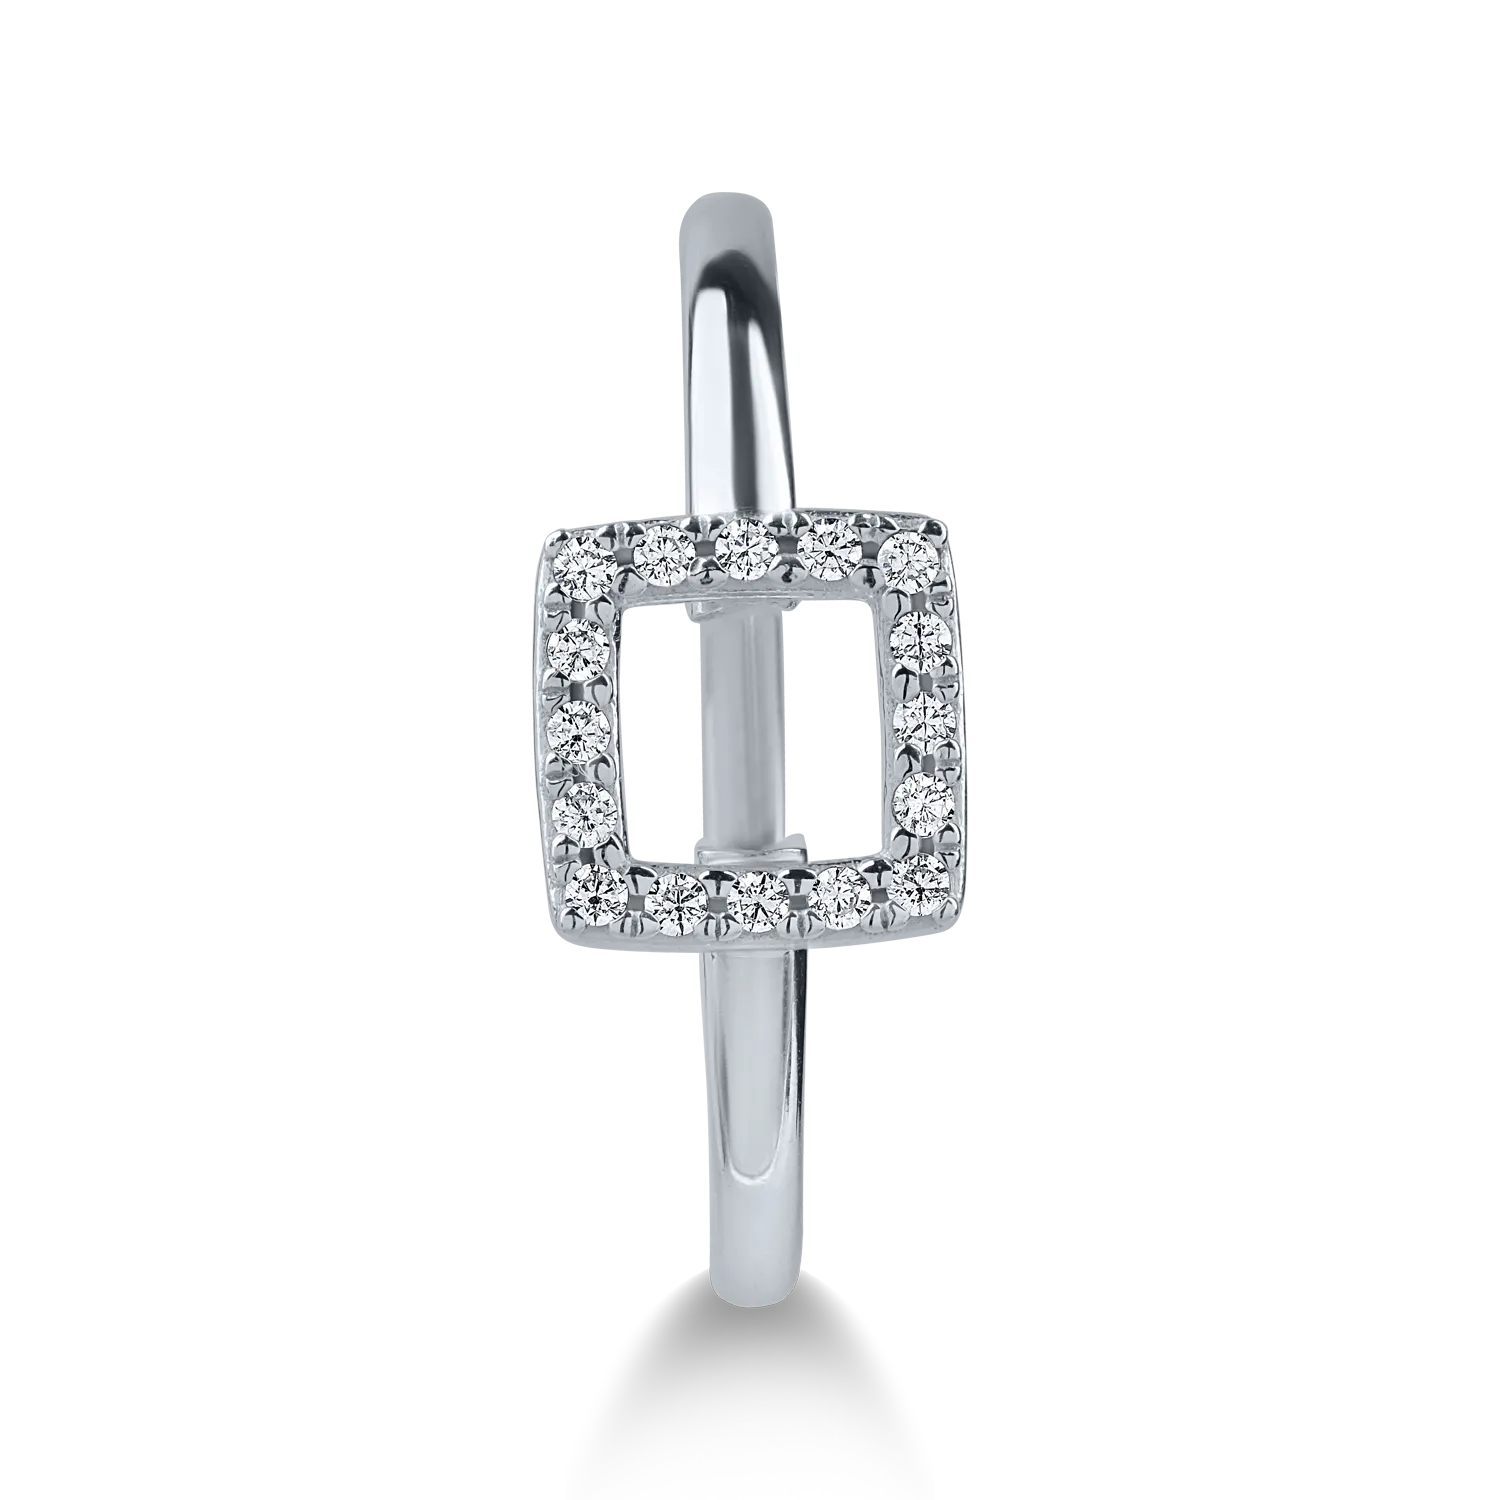 White gold geometric ring with zirconia